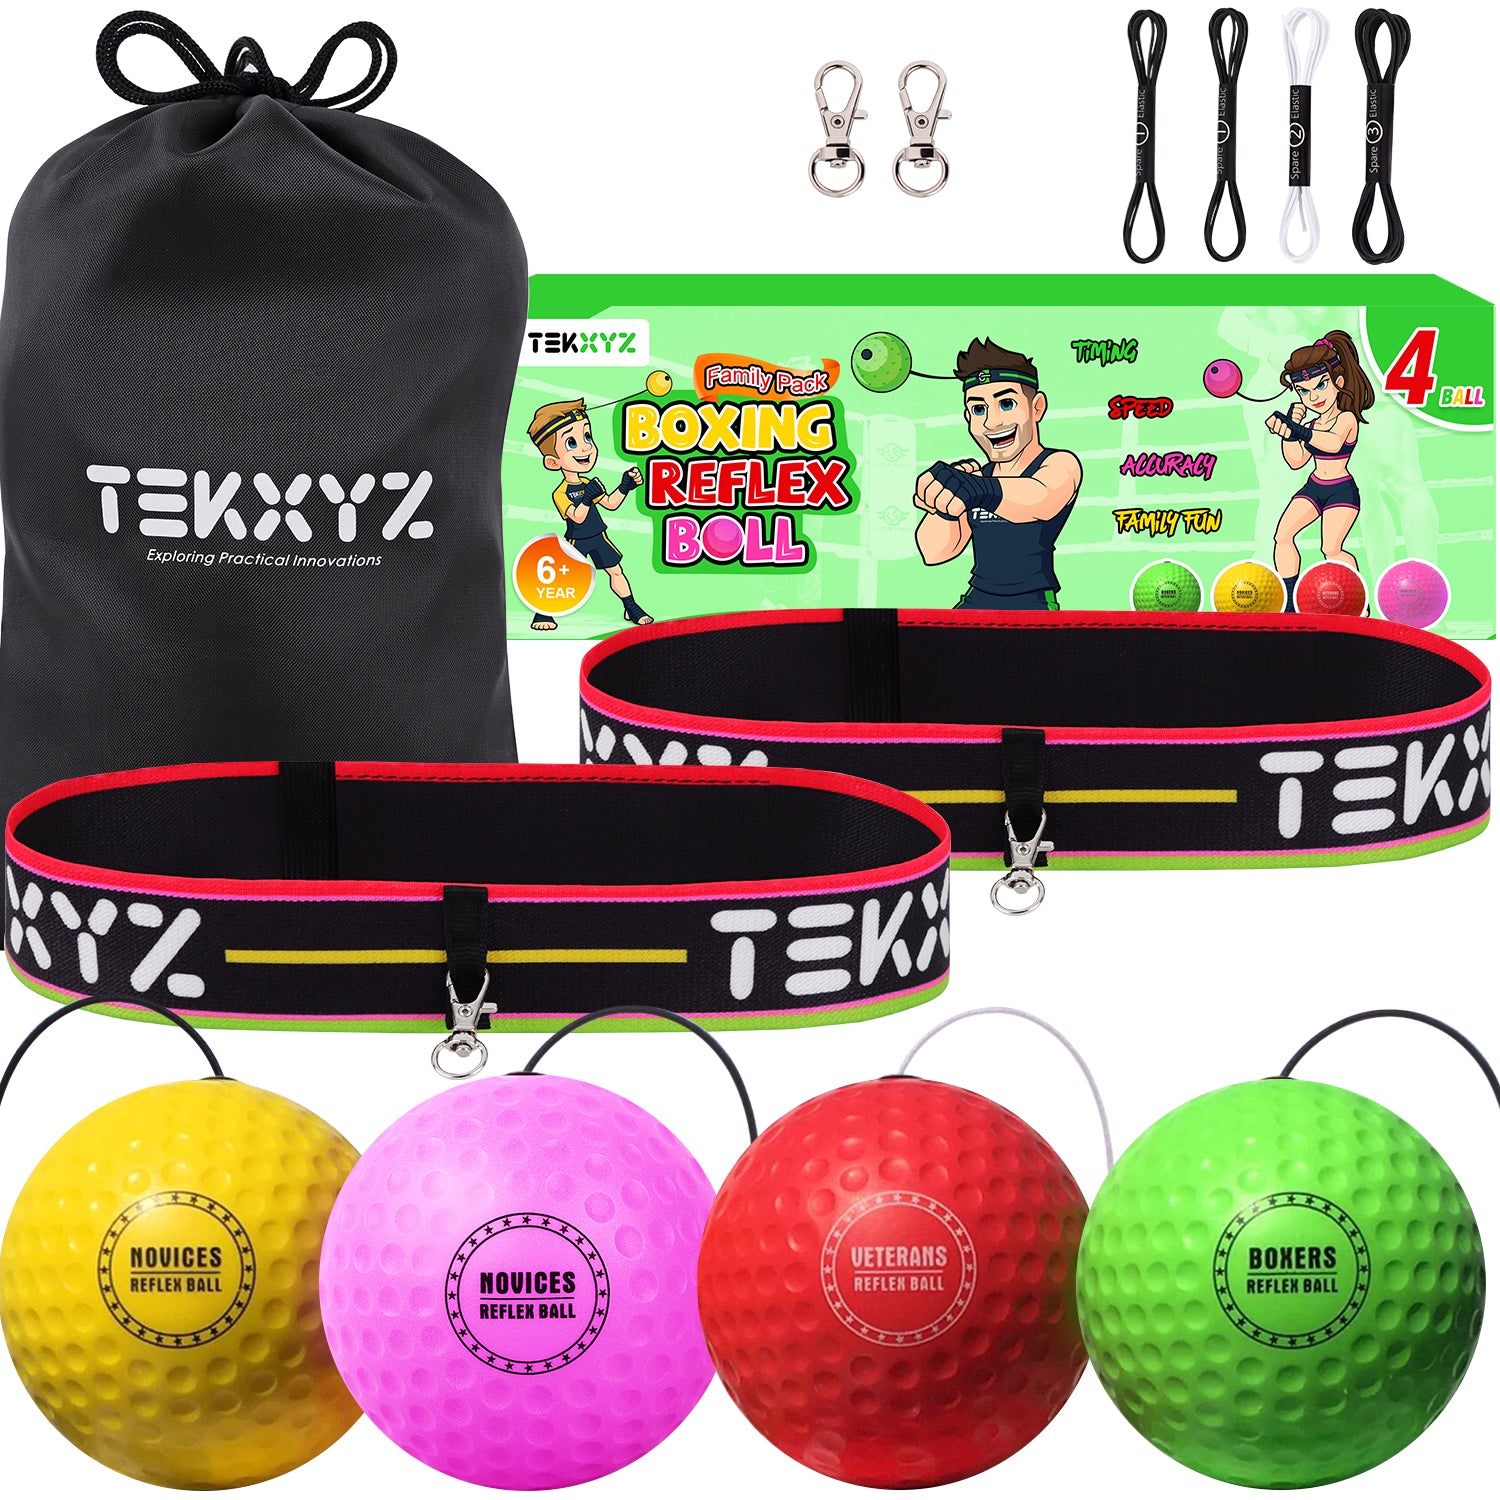 TEKXYZ Boxing Reflex Ball Family Pack - Green/Red/Yellow/Pink